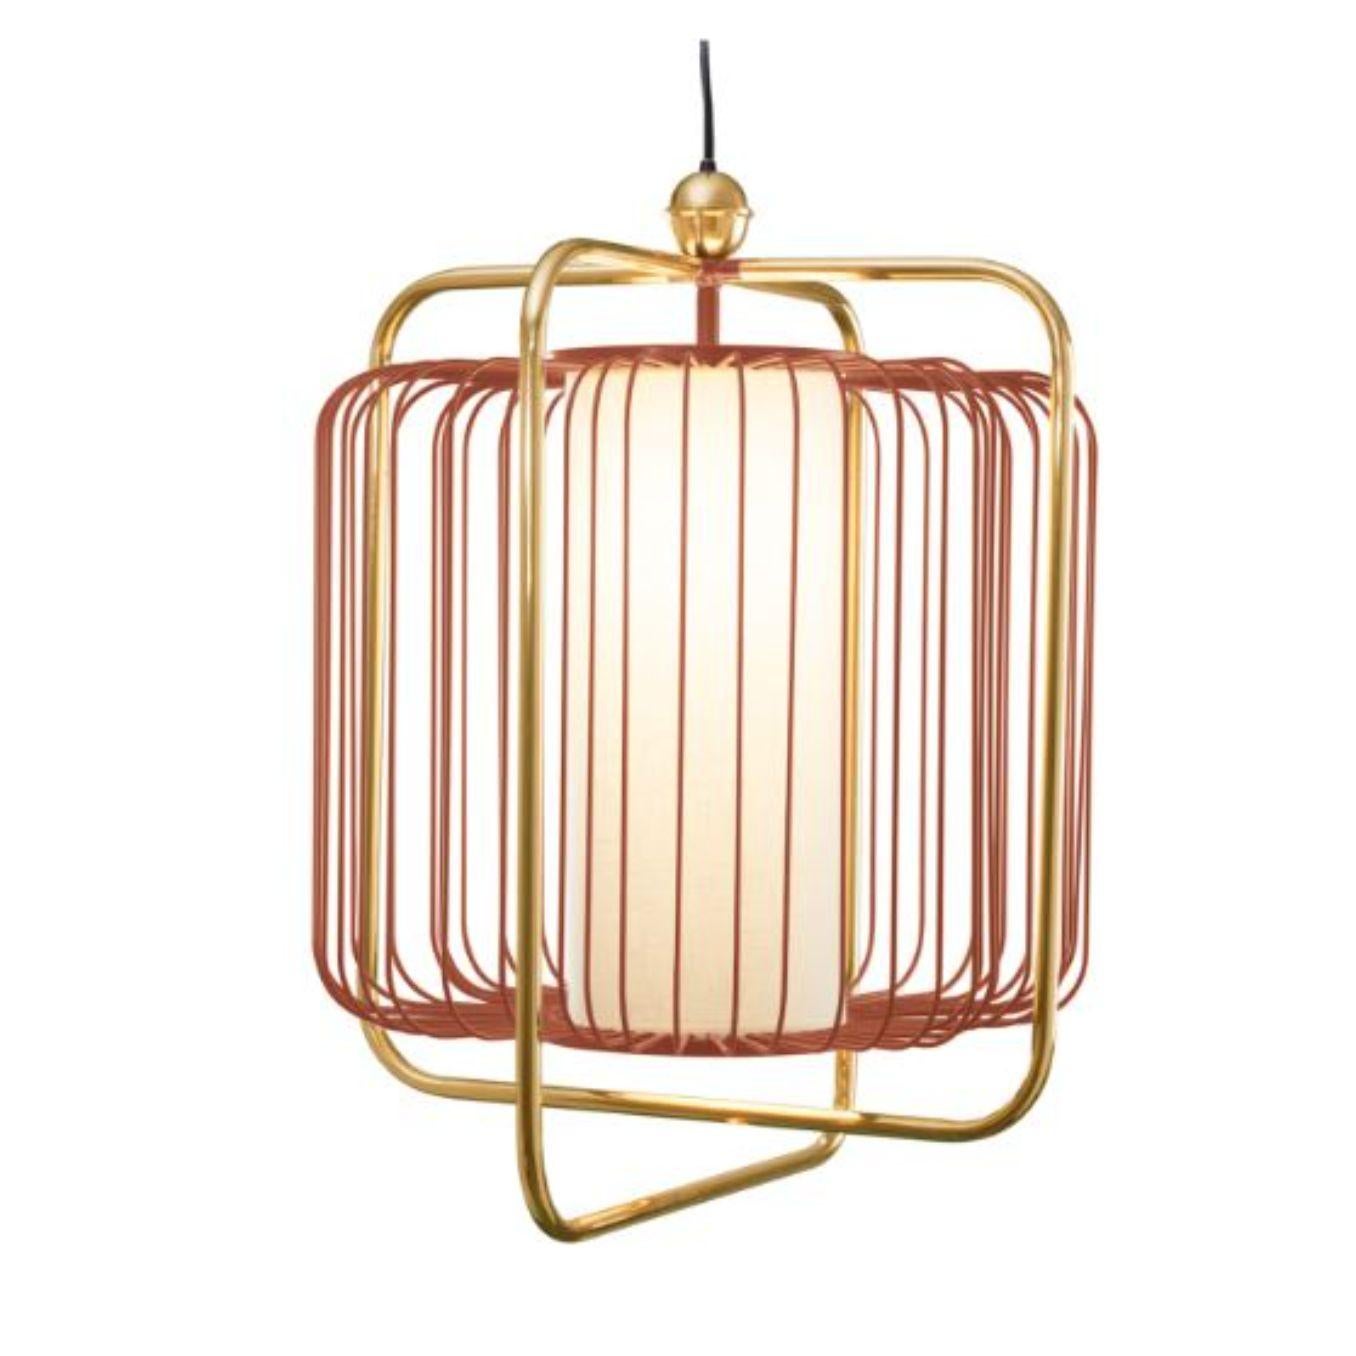 Brass and Copper Jules Suspension lamp by Dooq
Dimensions: W 73 x D 73 x H 72 cm
Materials: lacquered metal, polished or brushed metal, brass.
abat-jour: cotton
Also available in different colors and materials.